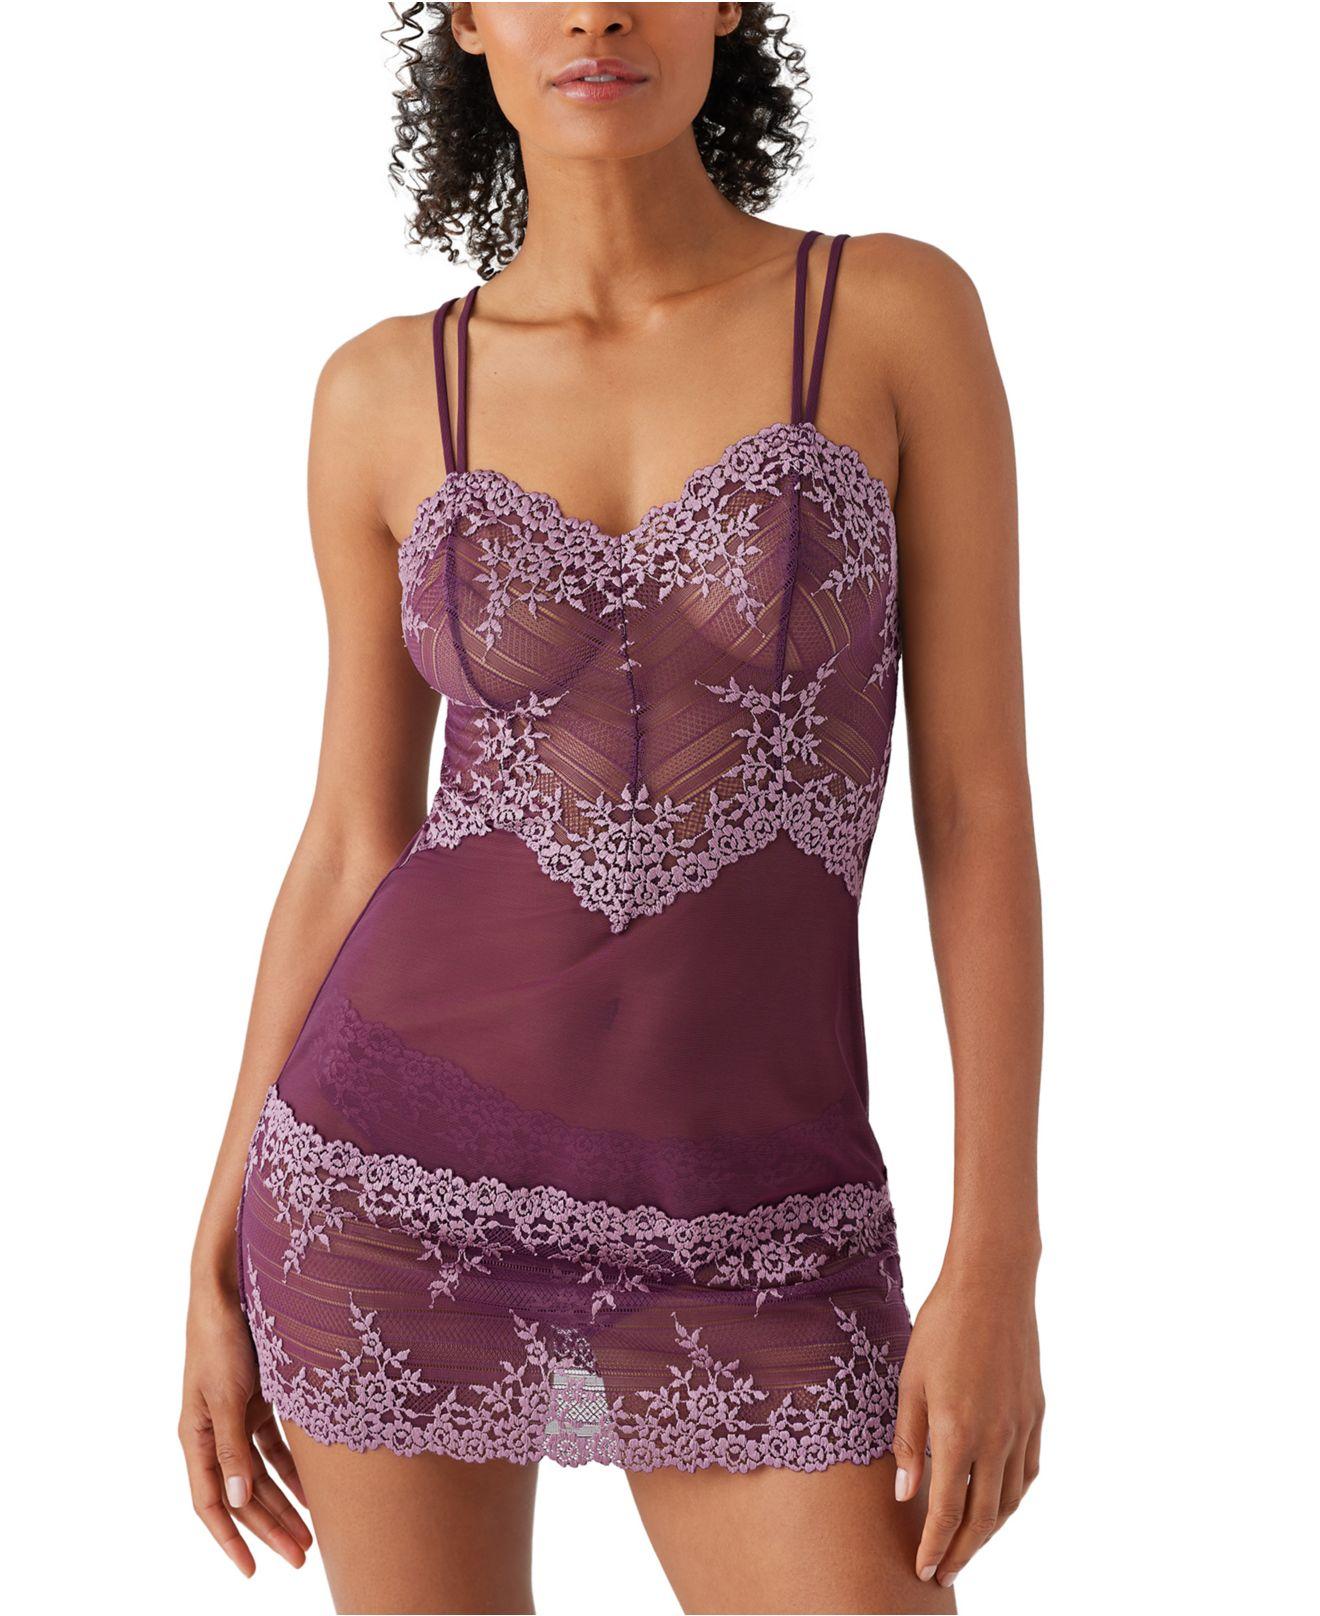 Wacoal ® Embrace Lace Sheer Chemise Lingerie Nightgown 814191 in